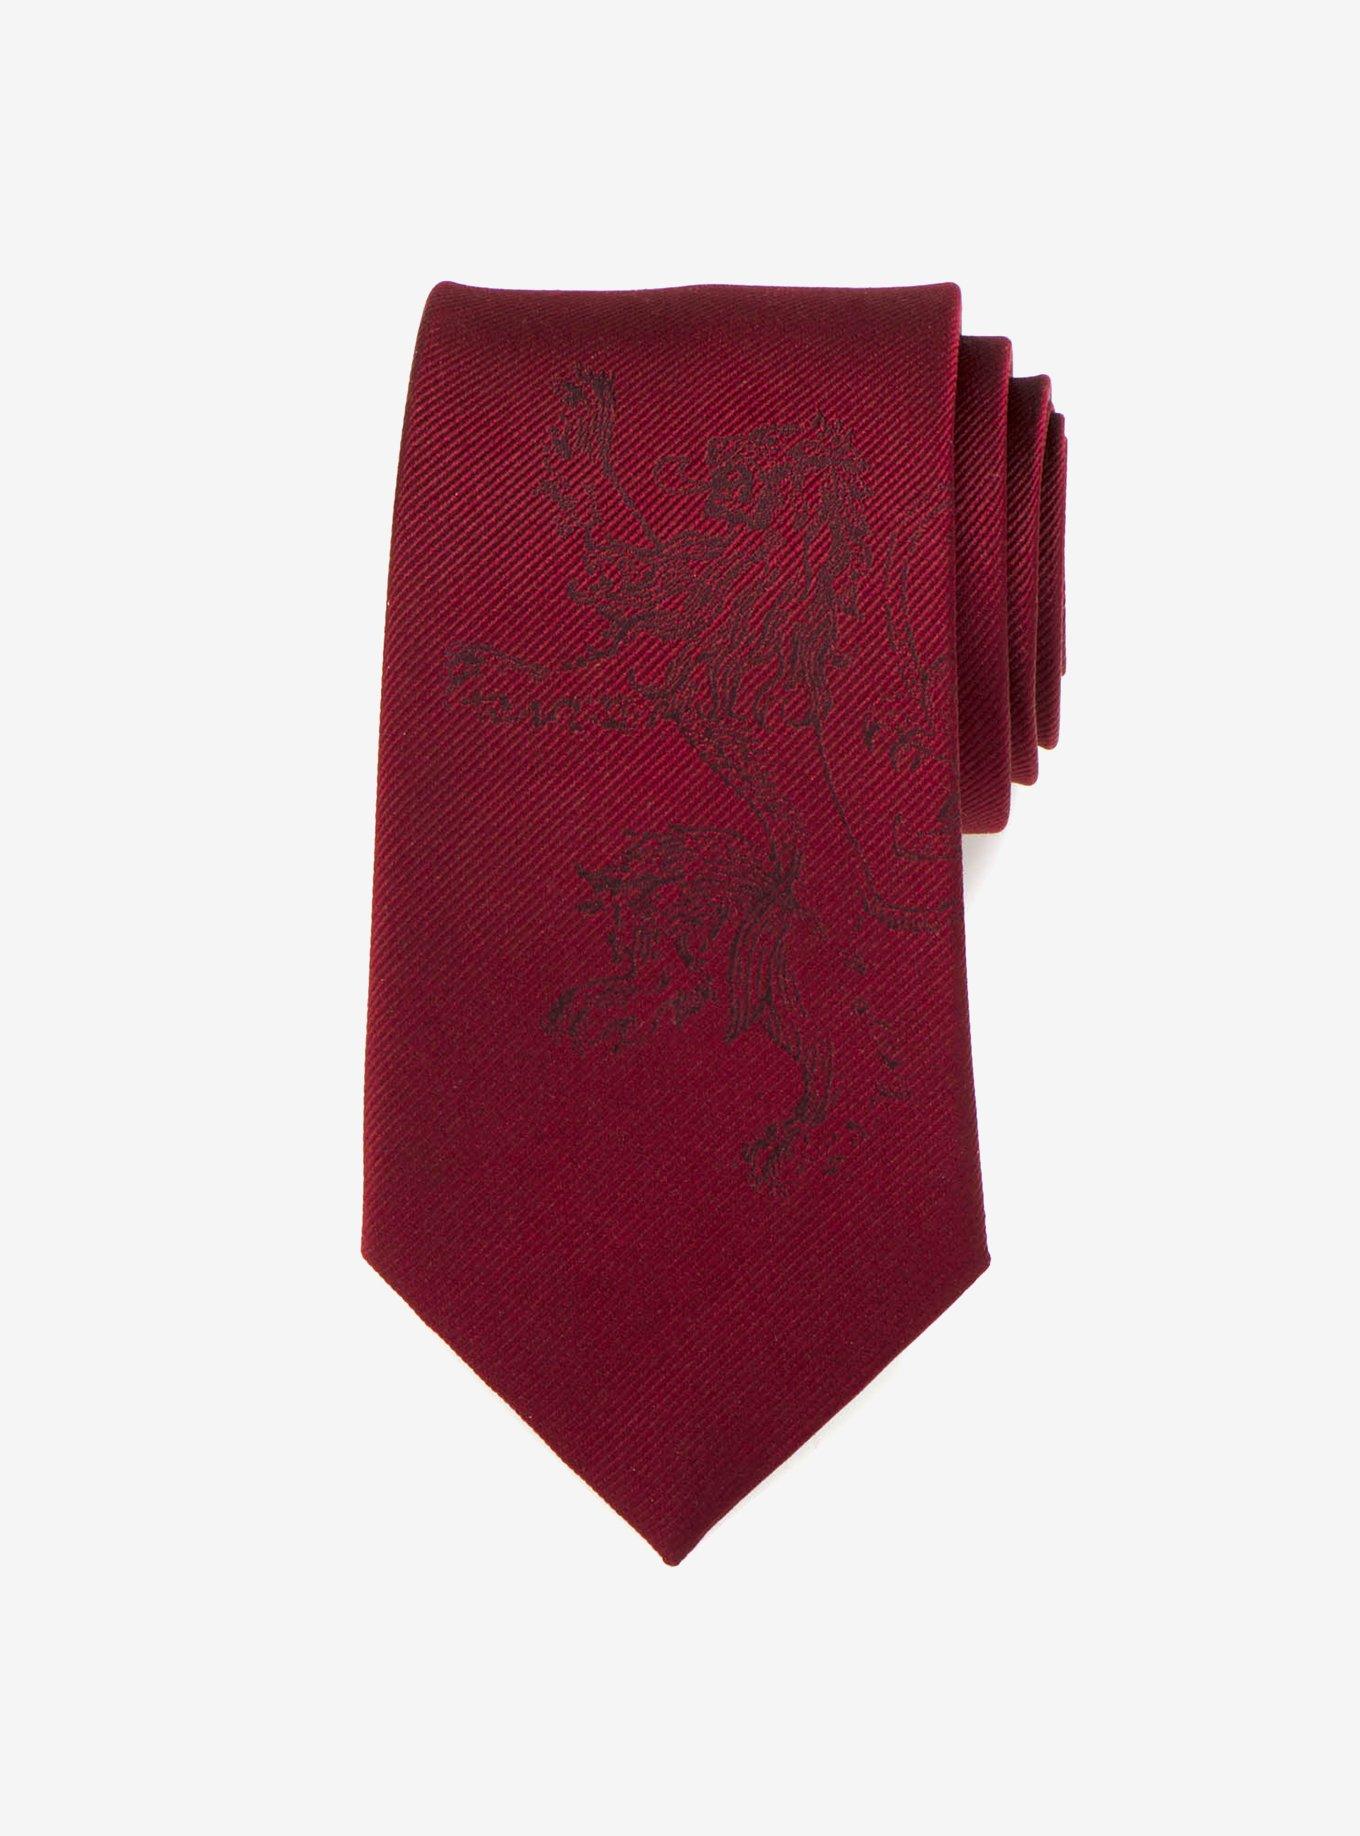 Game Of Thrones Lannister Lion Red Tie